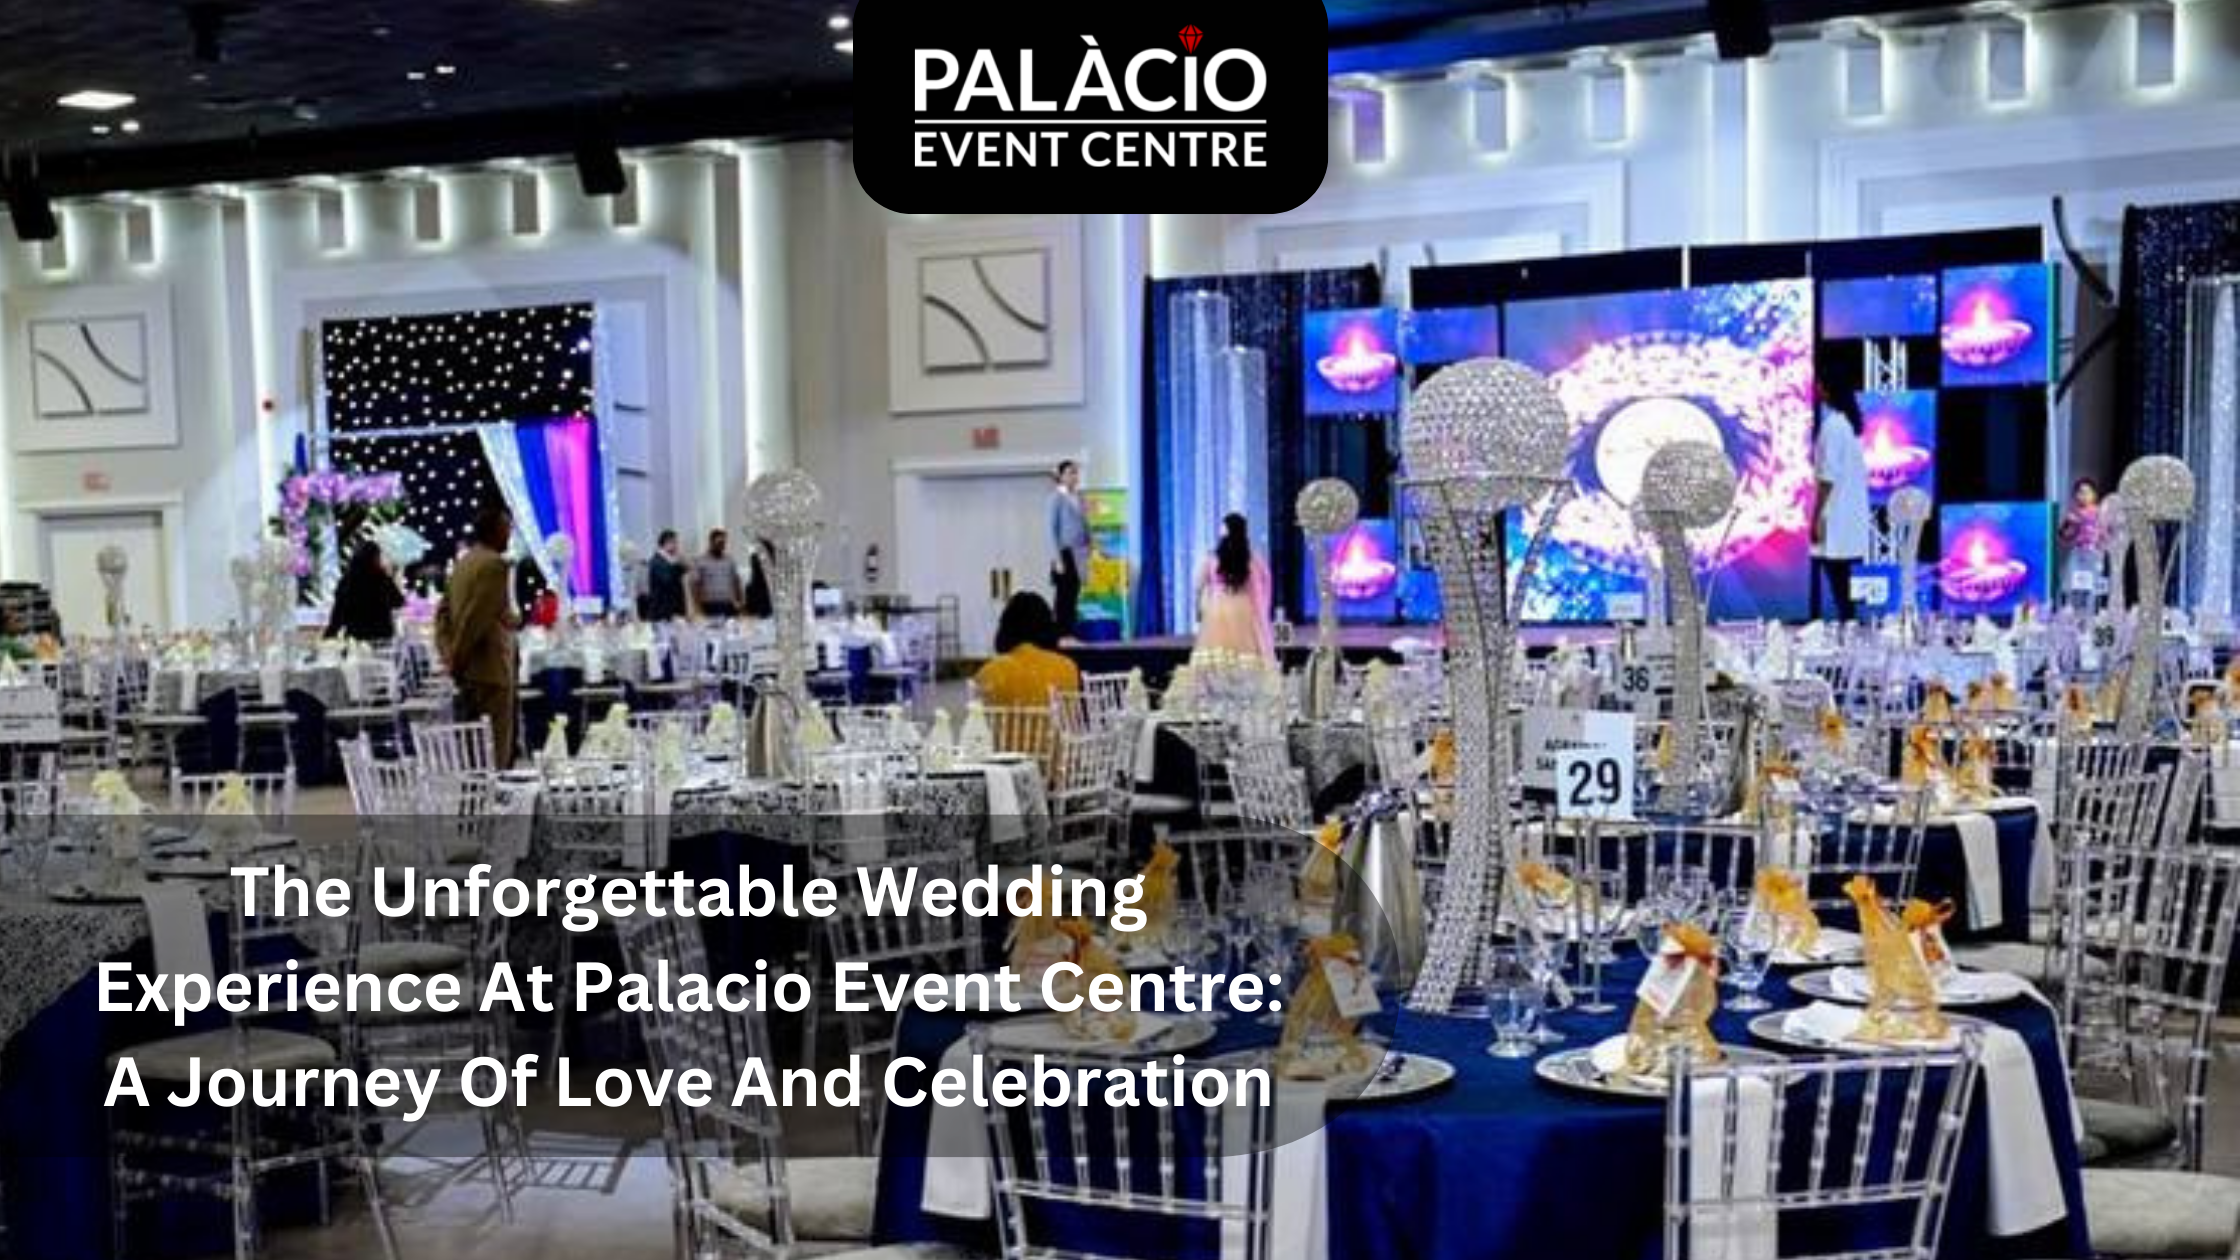 Unforgettable Wedding Experience At Palacio Event Centre